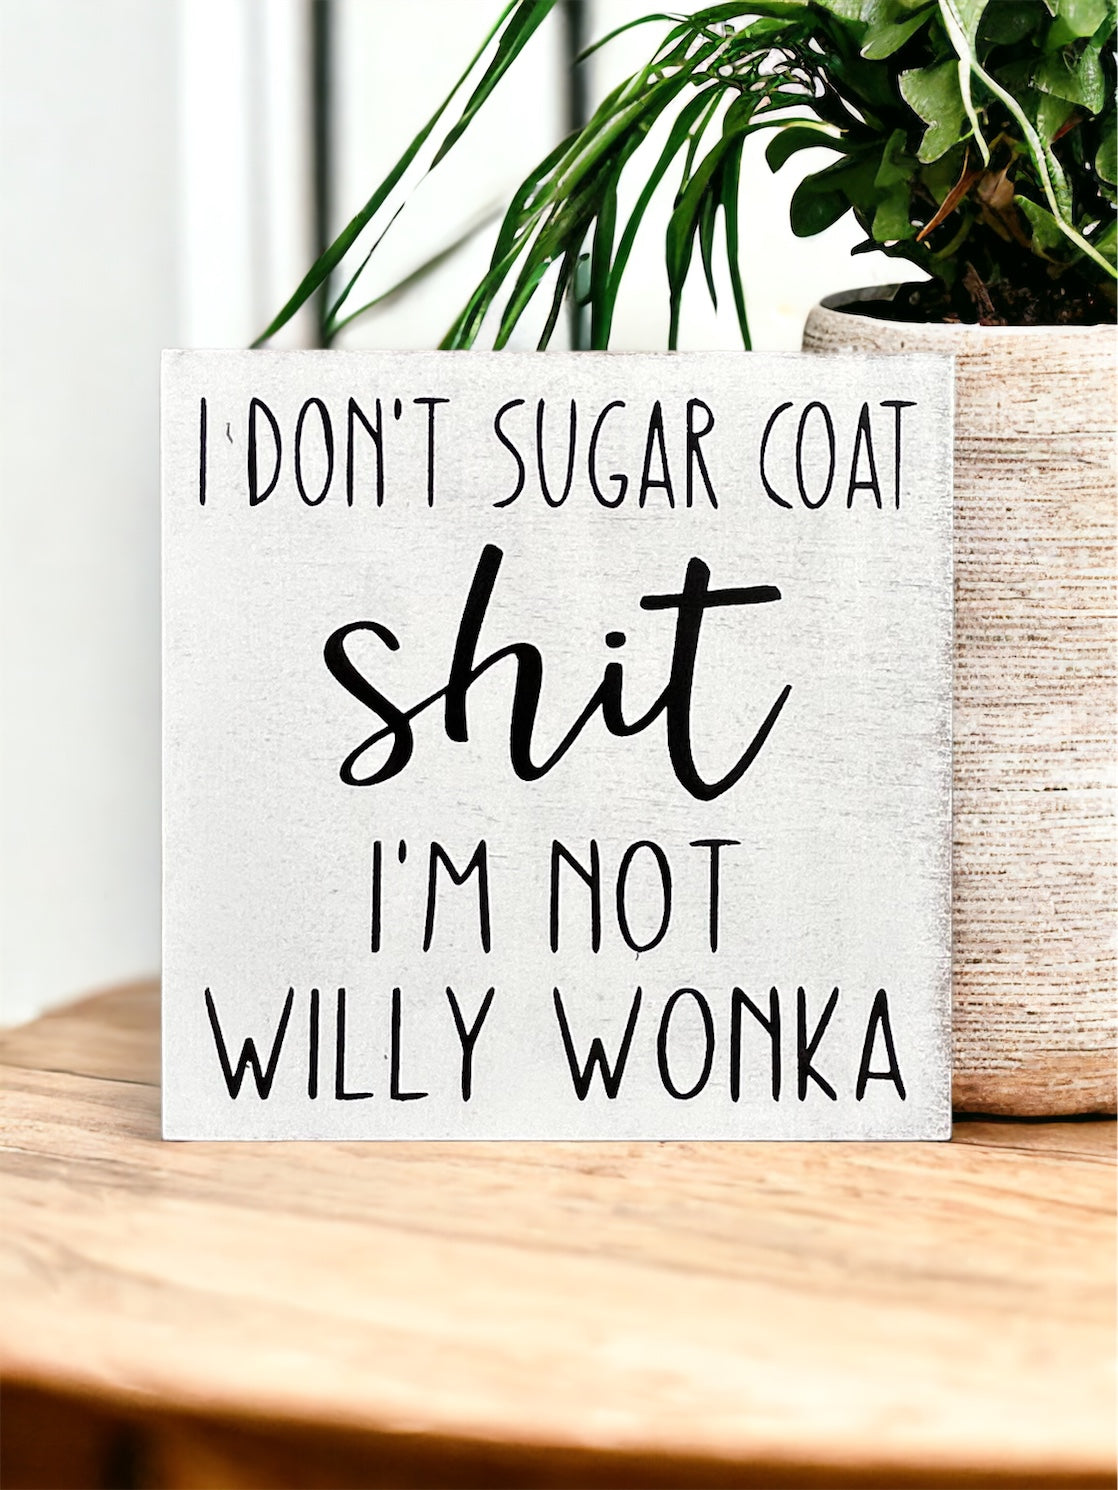 Funny "Willy Wonka" wood sign